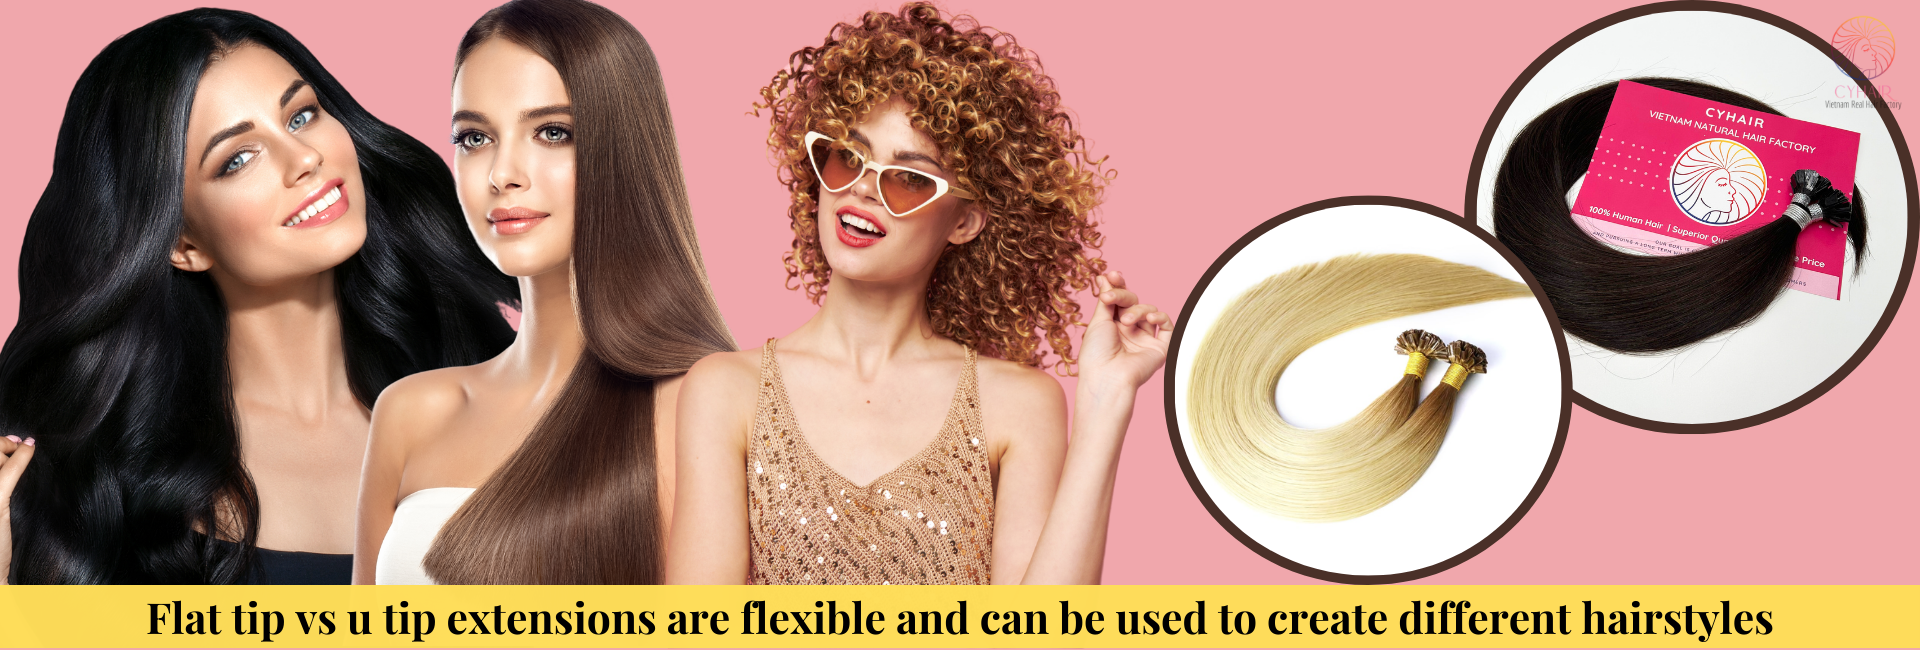 Flat tip vs u tip extensions are flexible and can be used to create different hairstyles